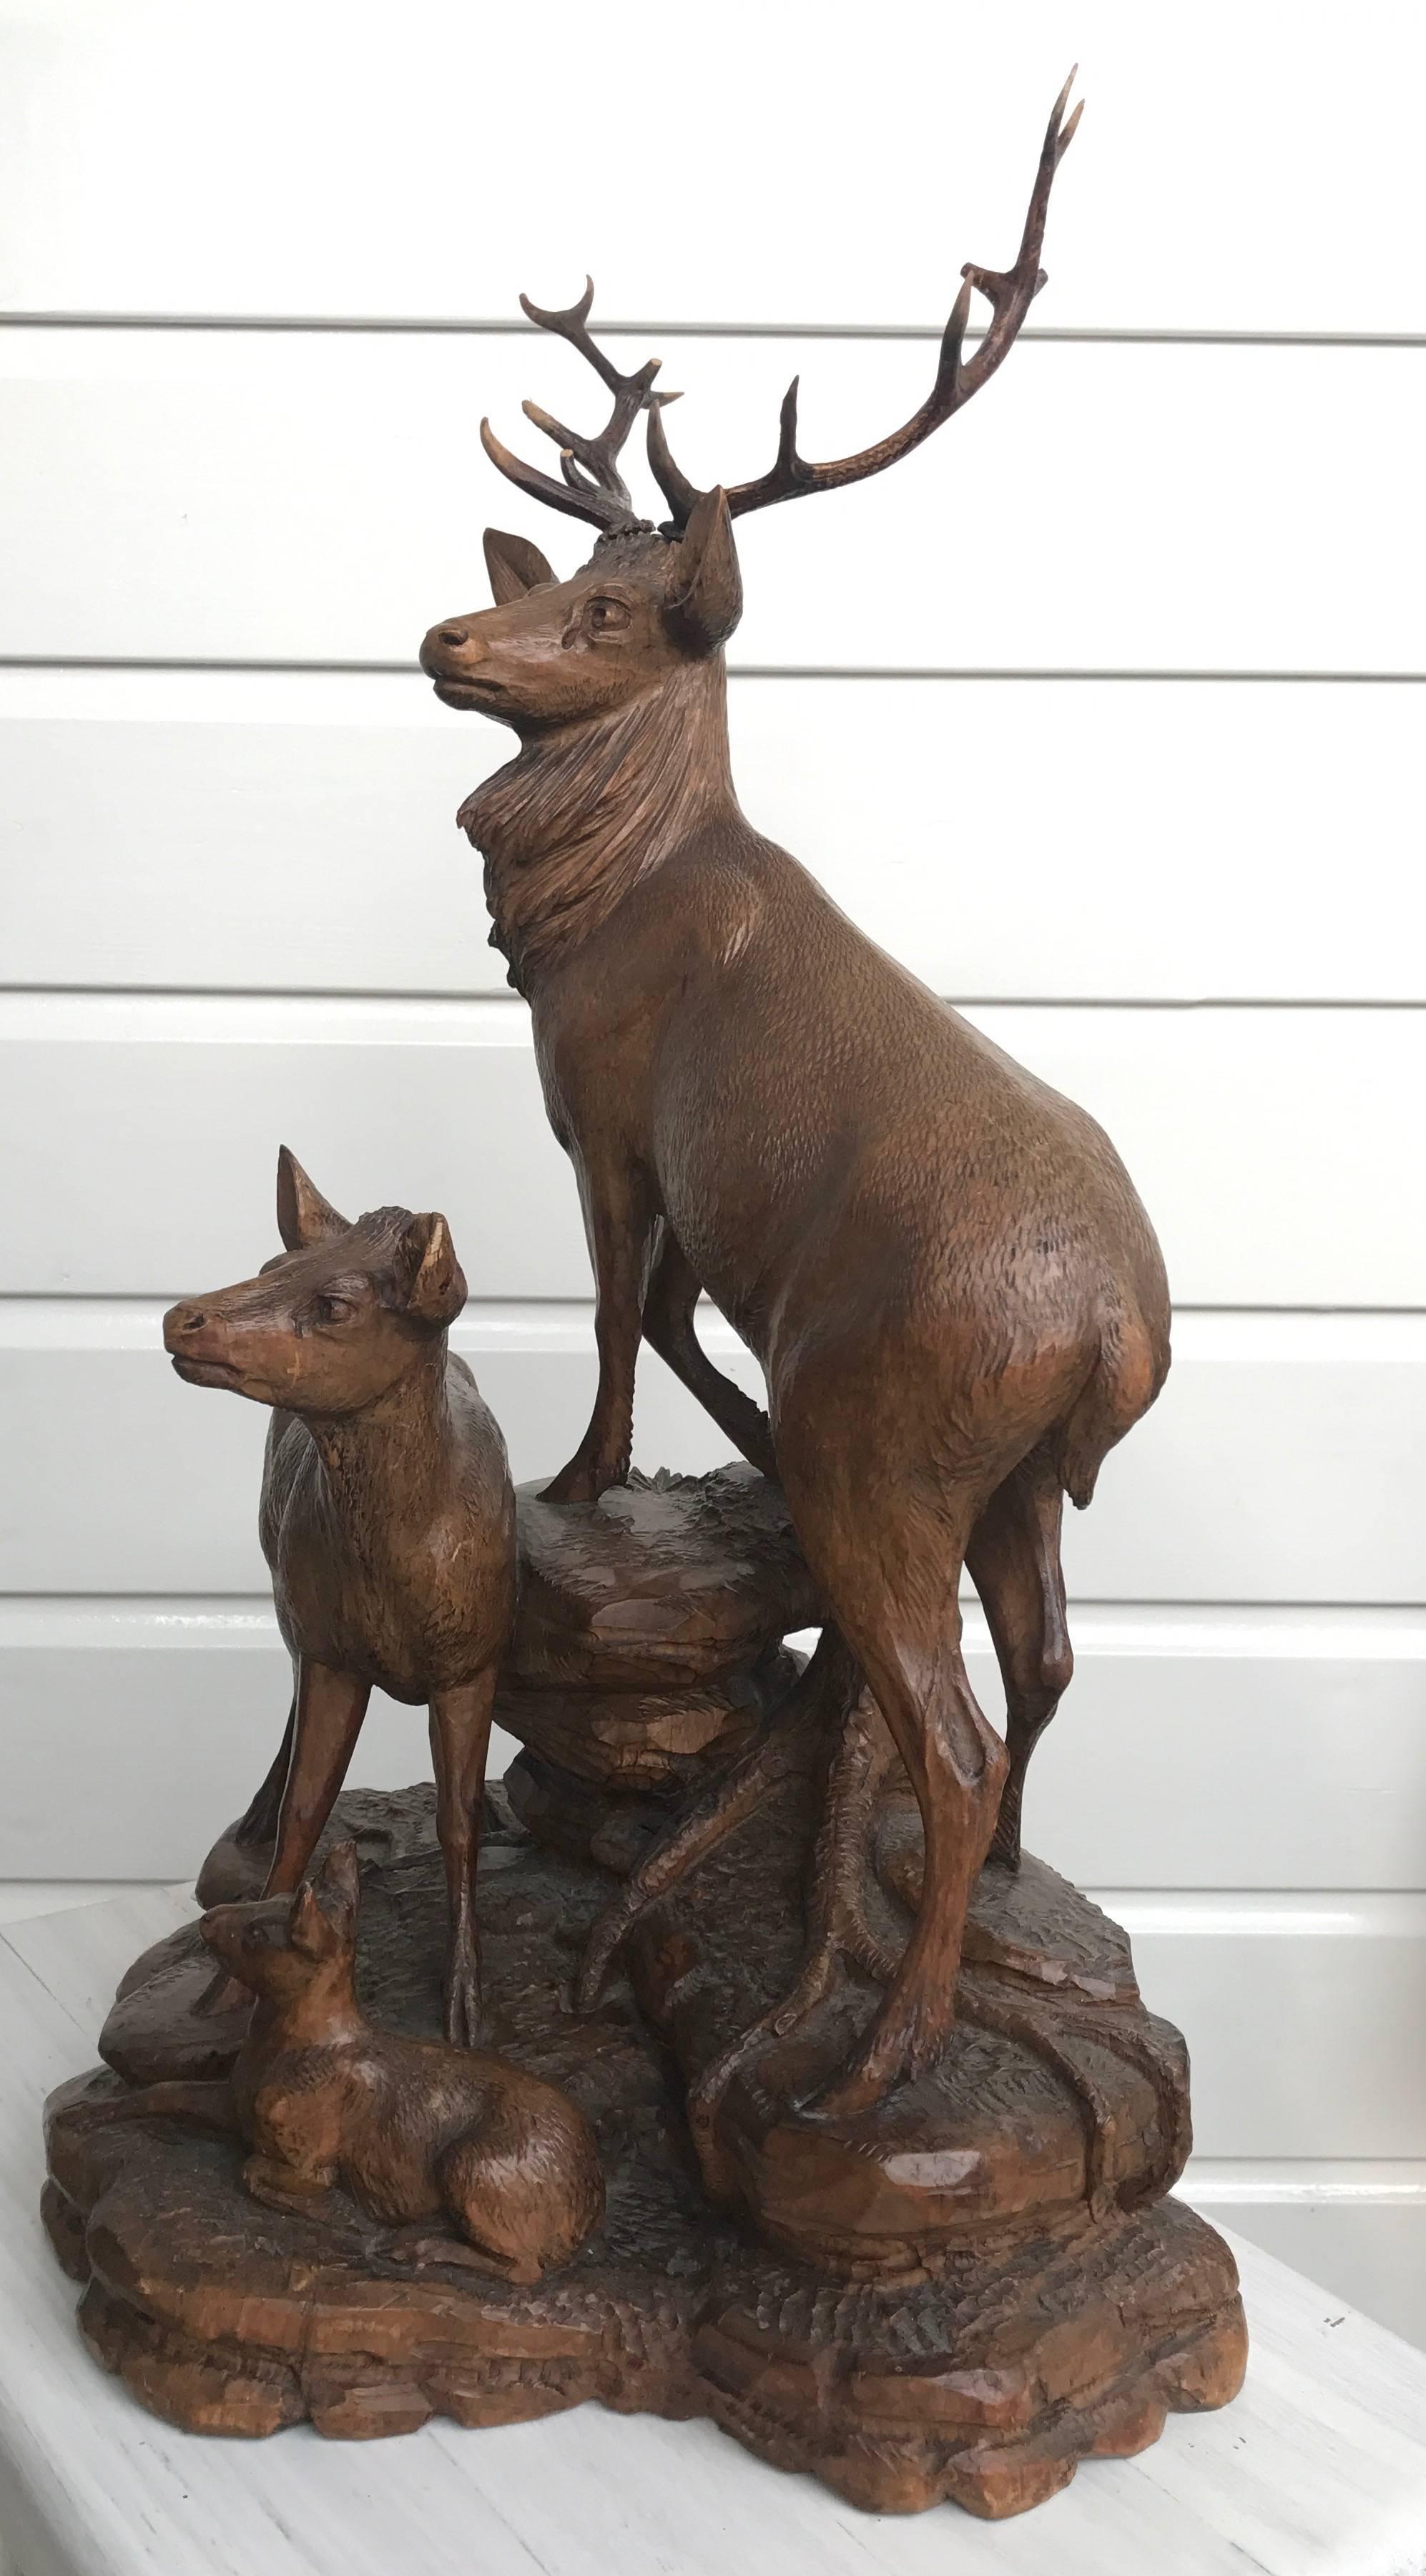 Swiss Antique and Large Hand-Carved Black Forest Walnut Deer Family Sculpture Statue